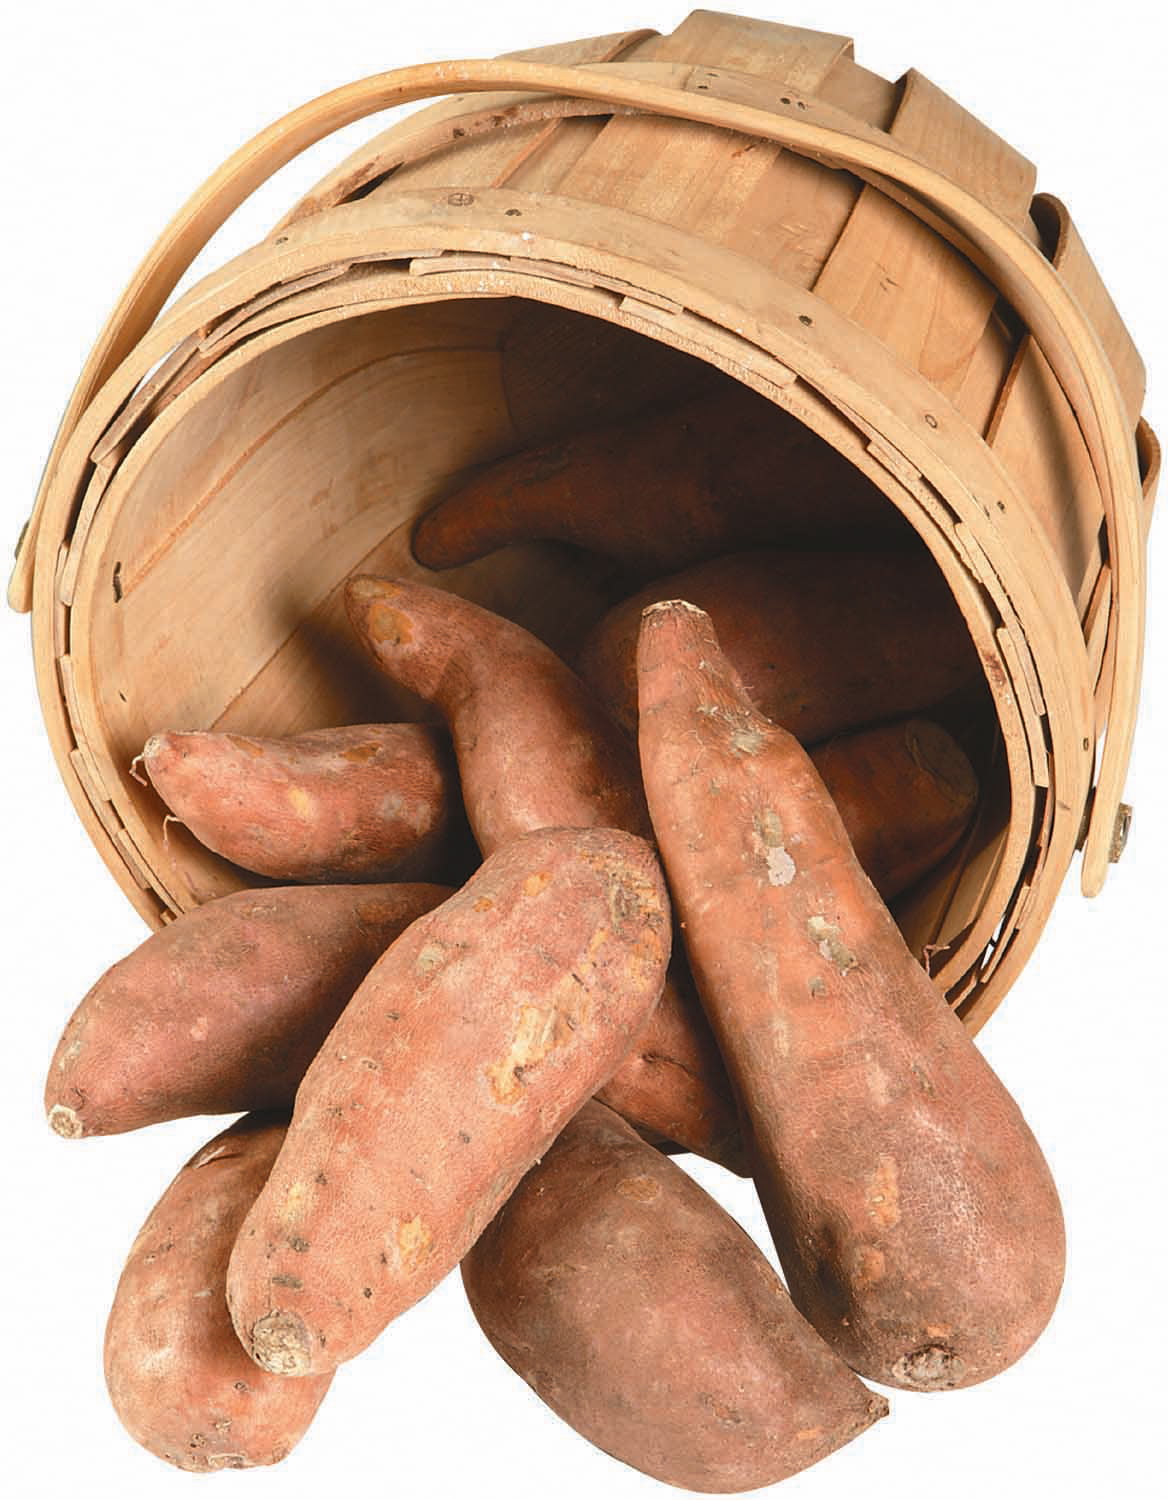 Sweet Potatoes Falling Out of Basket Food Picture